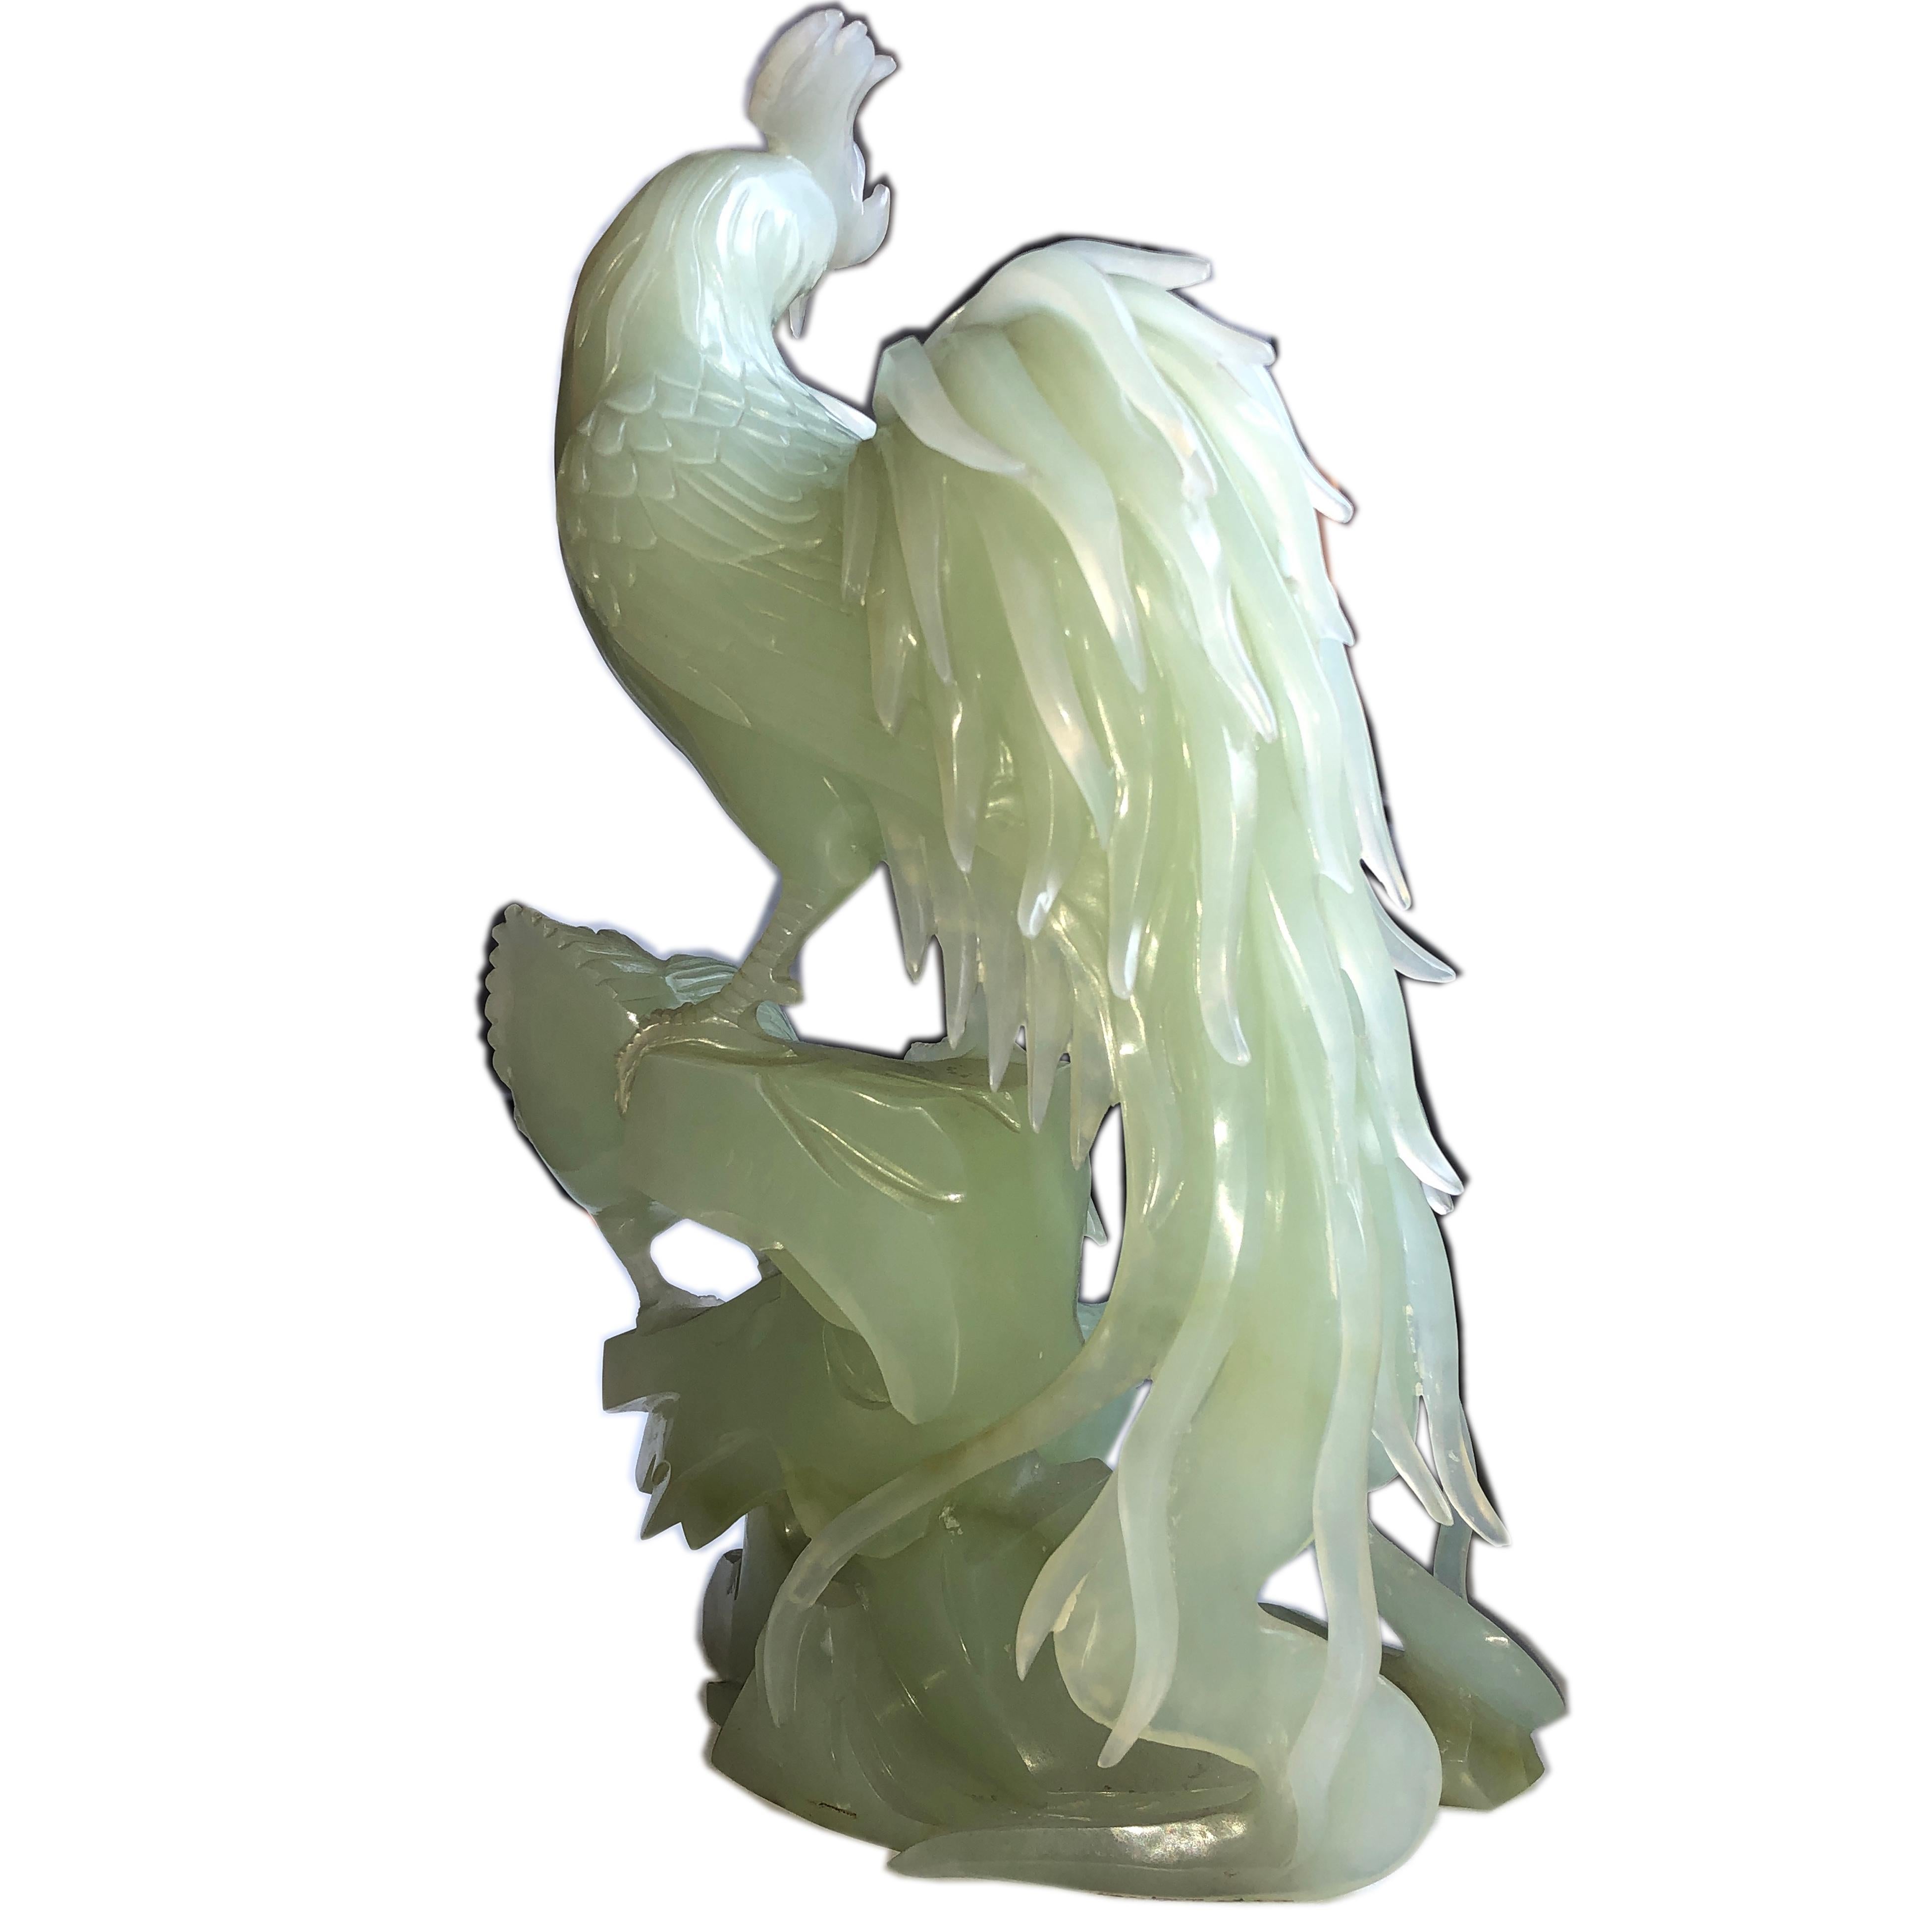 One-of-a-kind, Original 1930, Chinese Export Natural Pale Jade Rooster and Chicks. Hand Carving and Engraving Work is Beautifully Crisp and Detailed. 
Rooster is the 10th animal in the Chinese Zodiac: those born in Rooster years are said to be